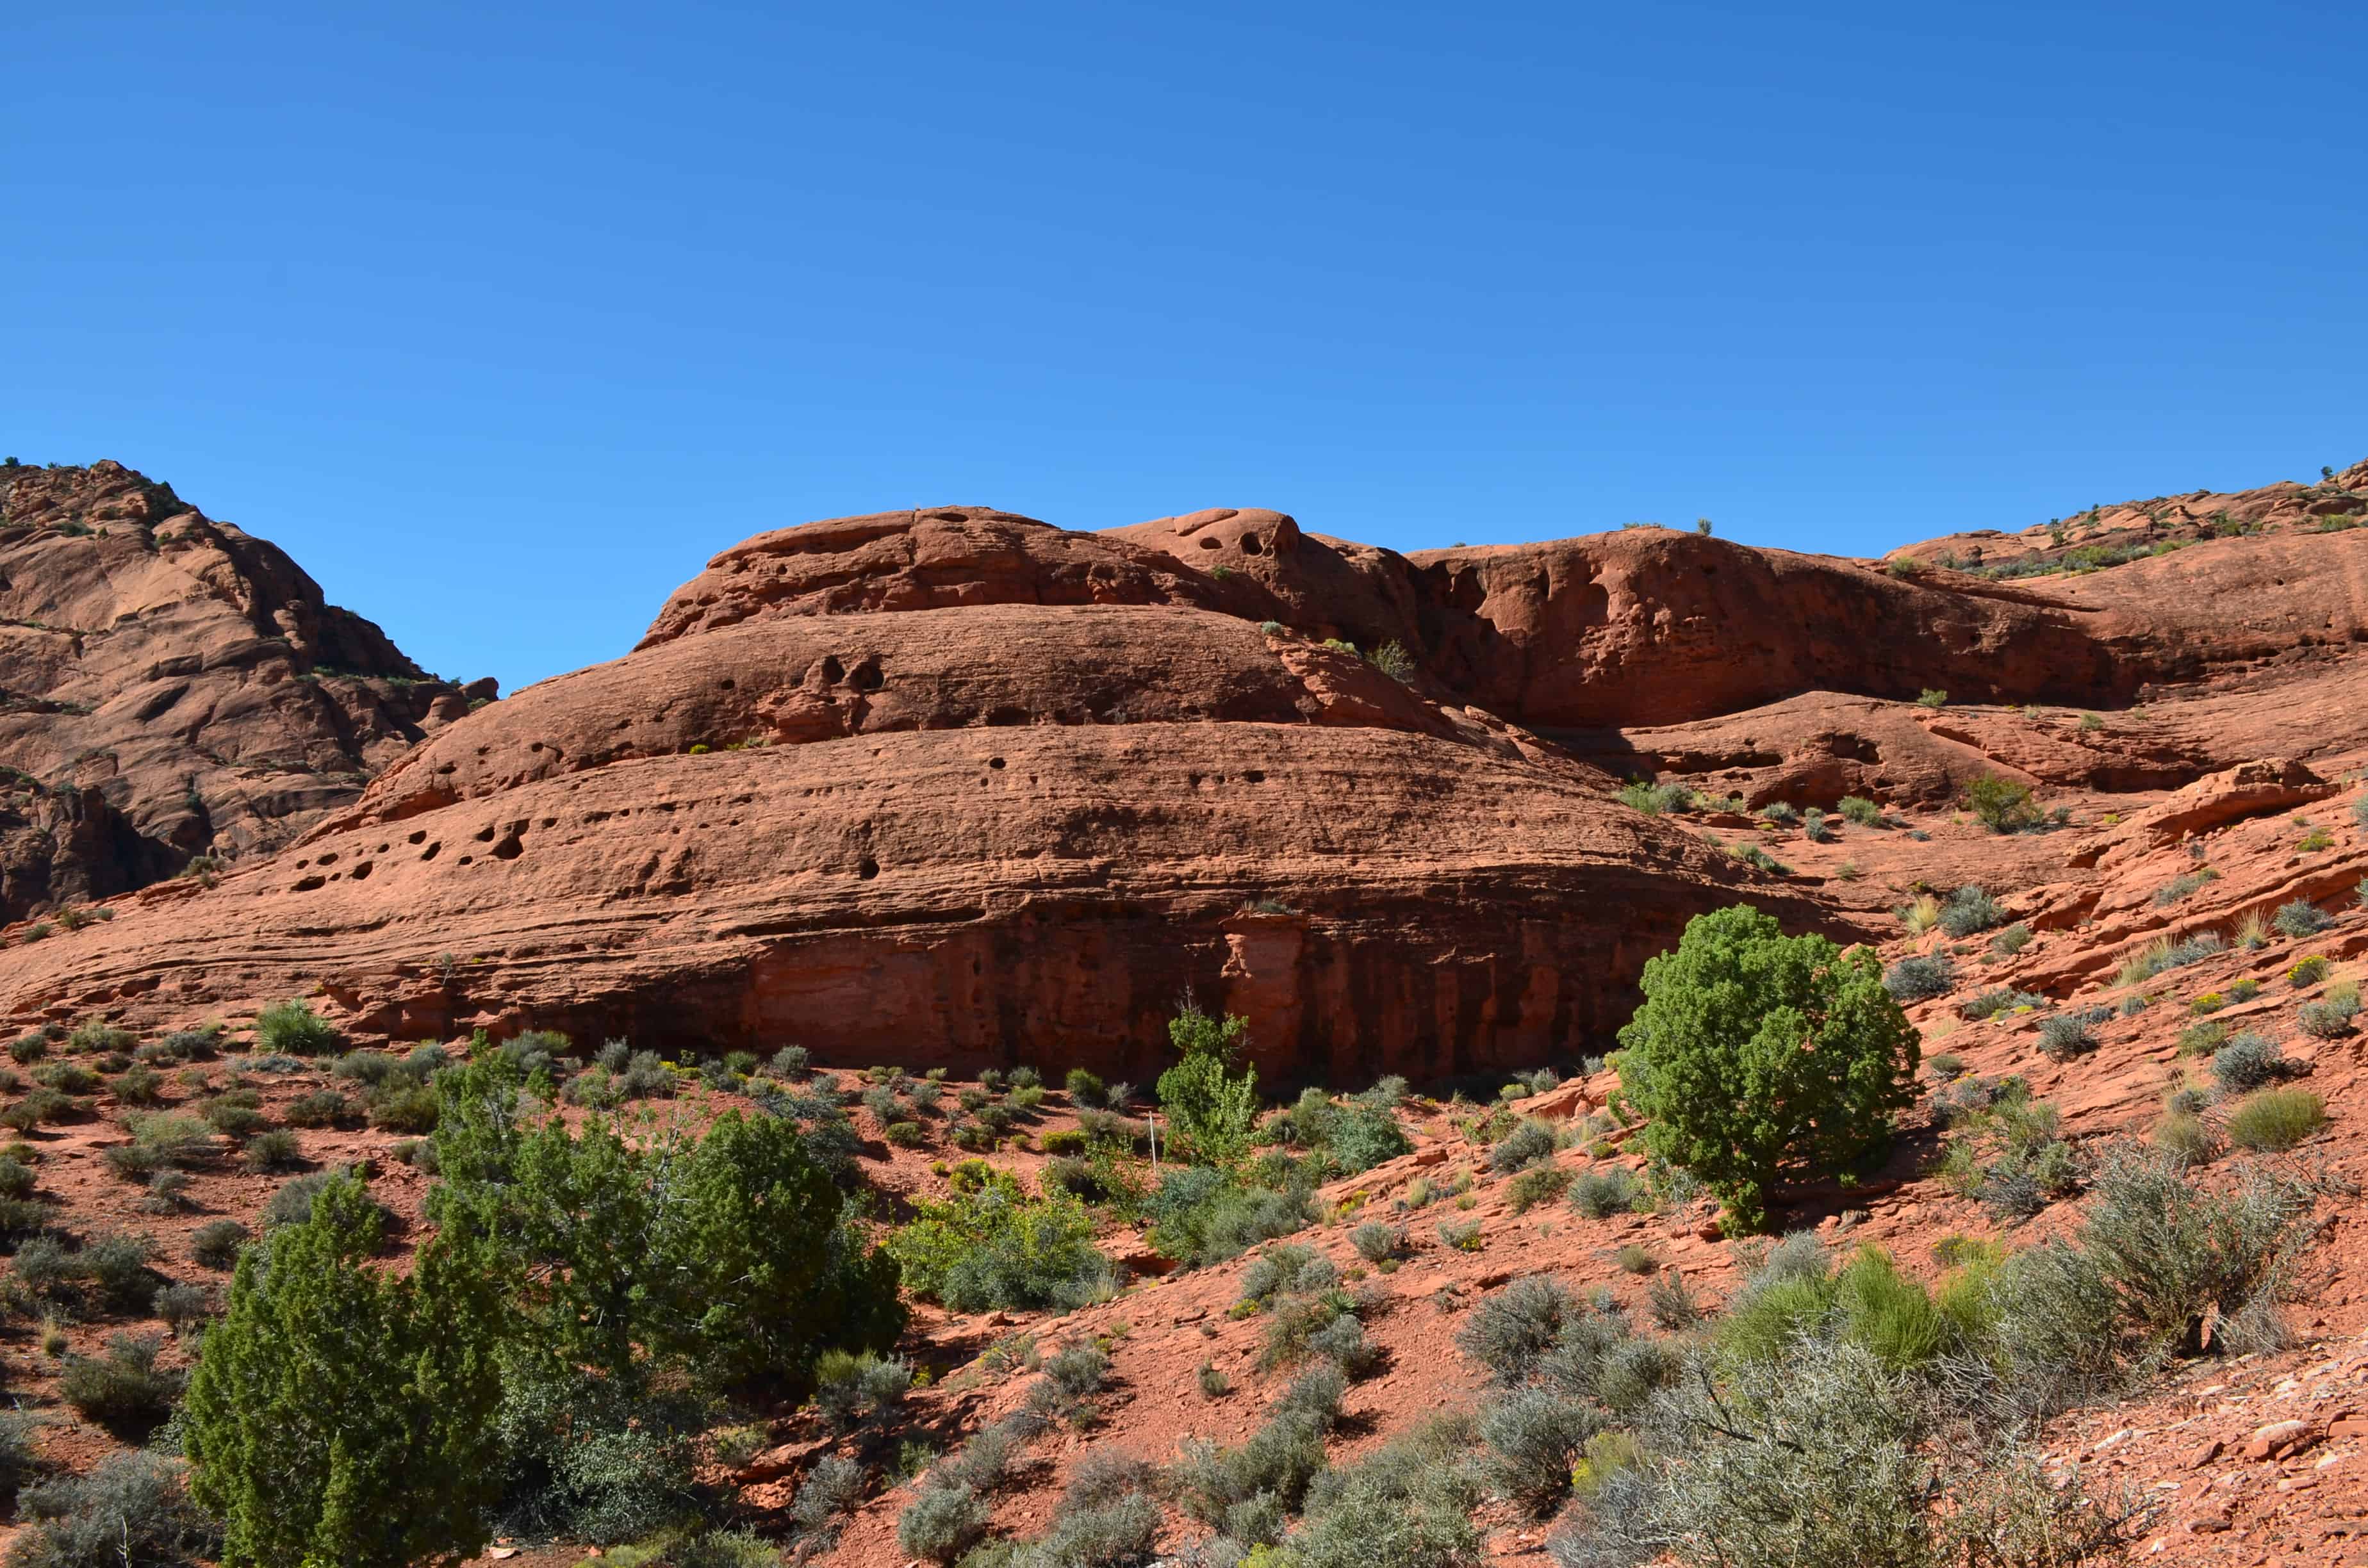 Scenery on the Dinosaur Tracks Trail at Red Cliffs Recreation Area in Utah